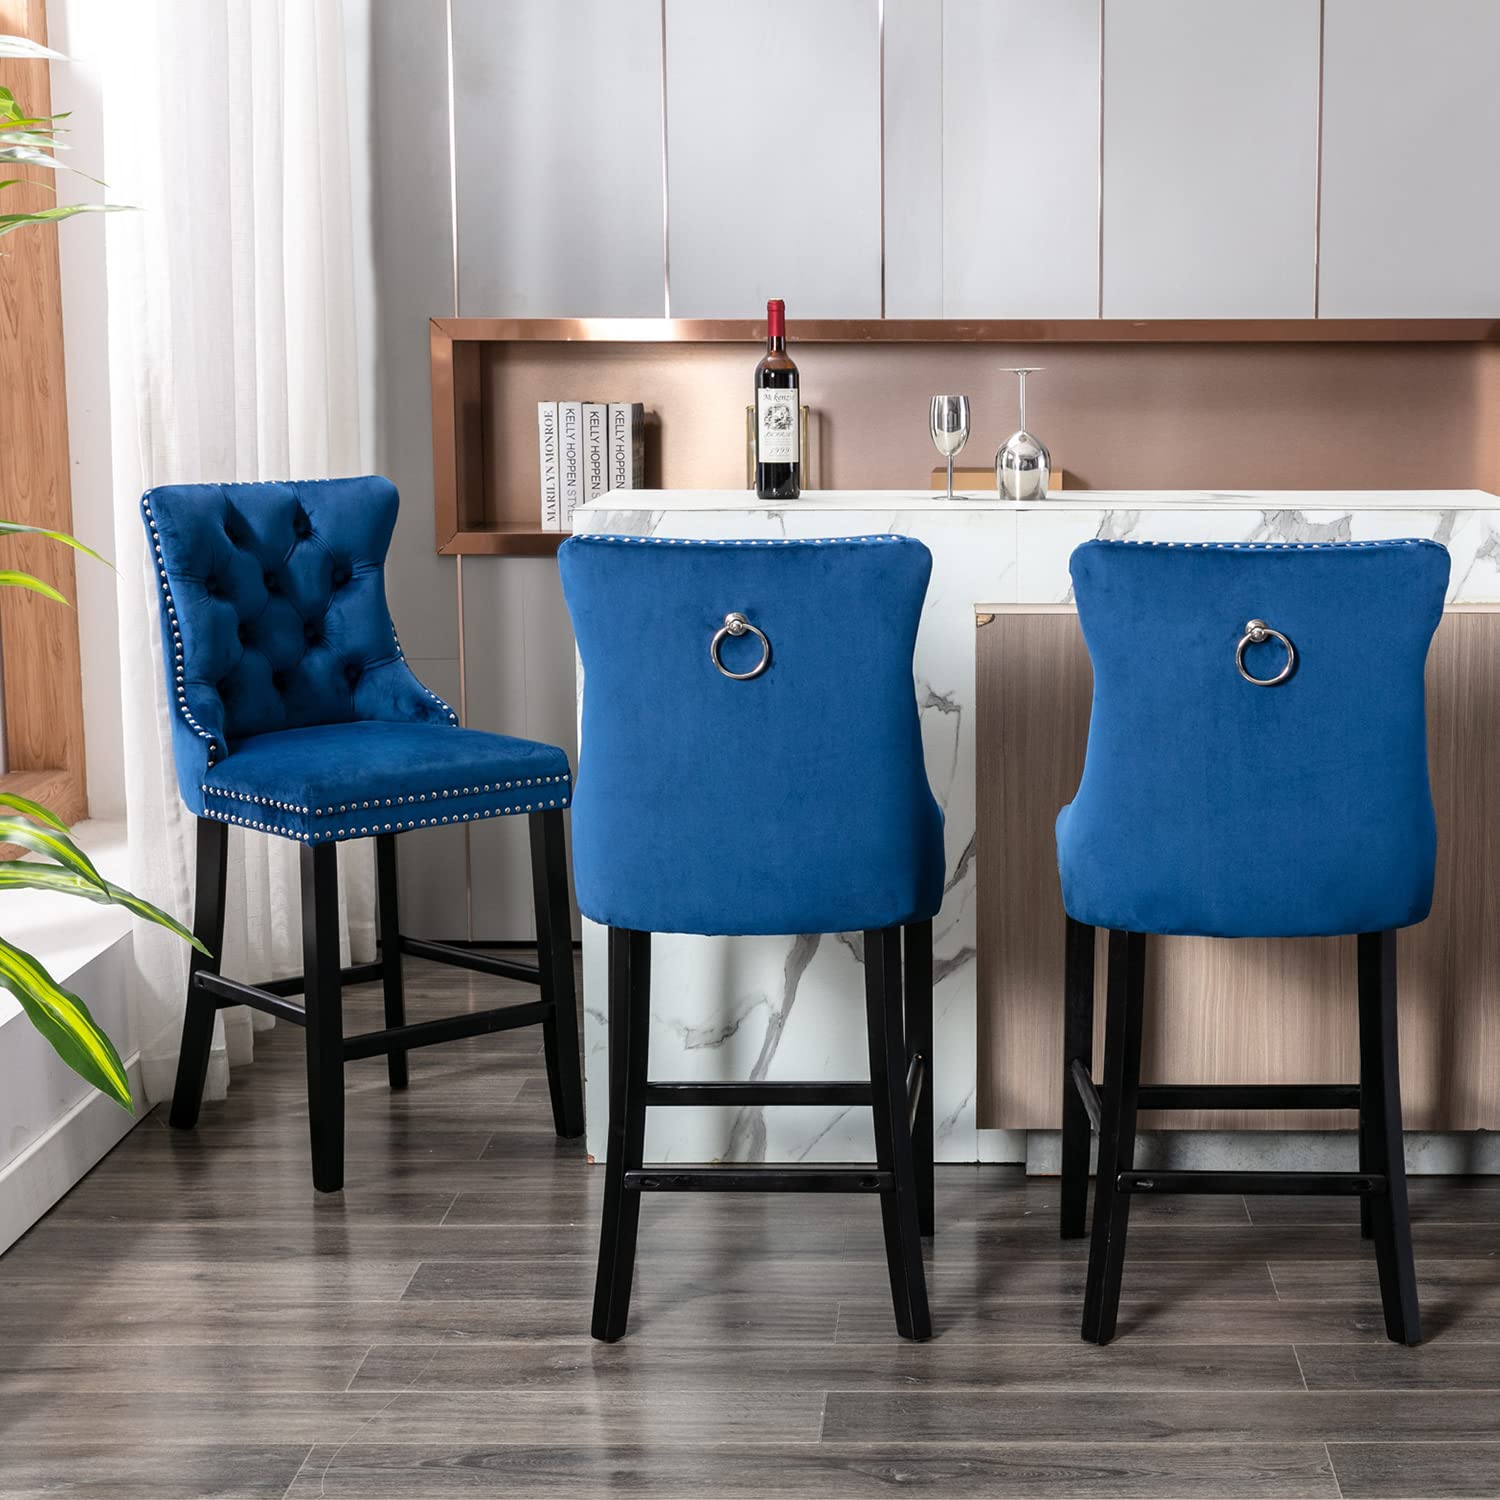 2X Velvet Bar Stools with Studs Trim Wooden Legs Tufted Dining Chairs Kitchen - image8